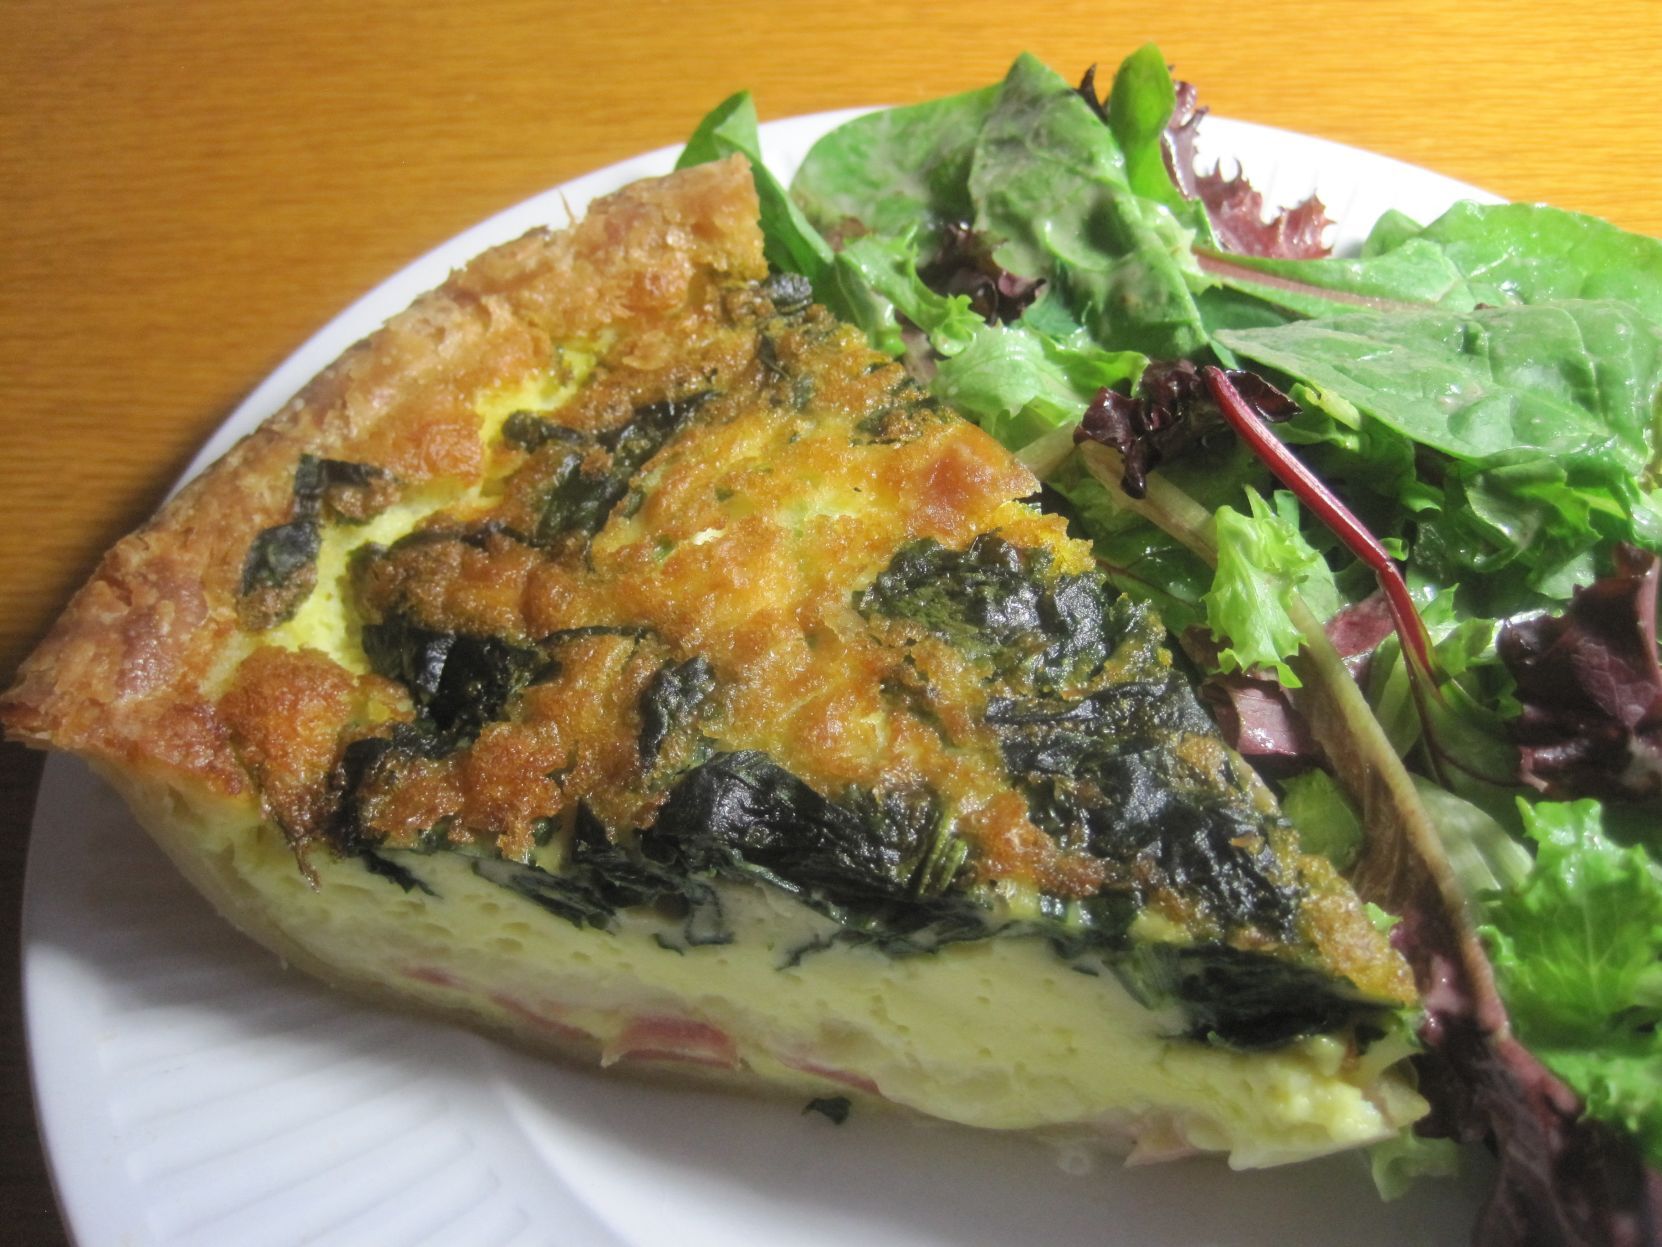 Avenues quiche recipe is ready for your personal touch picture pic